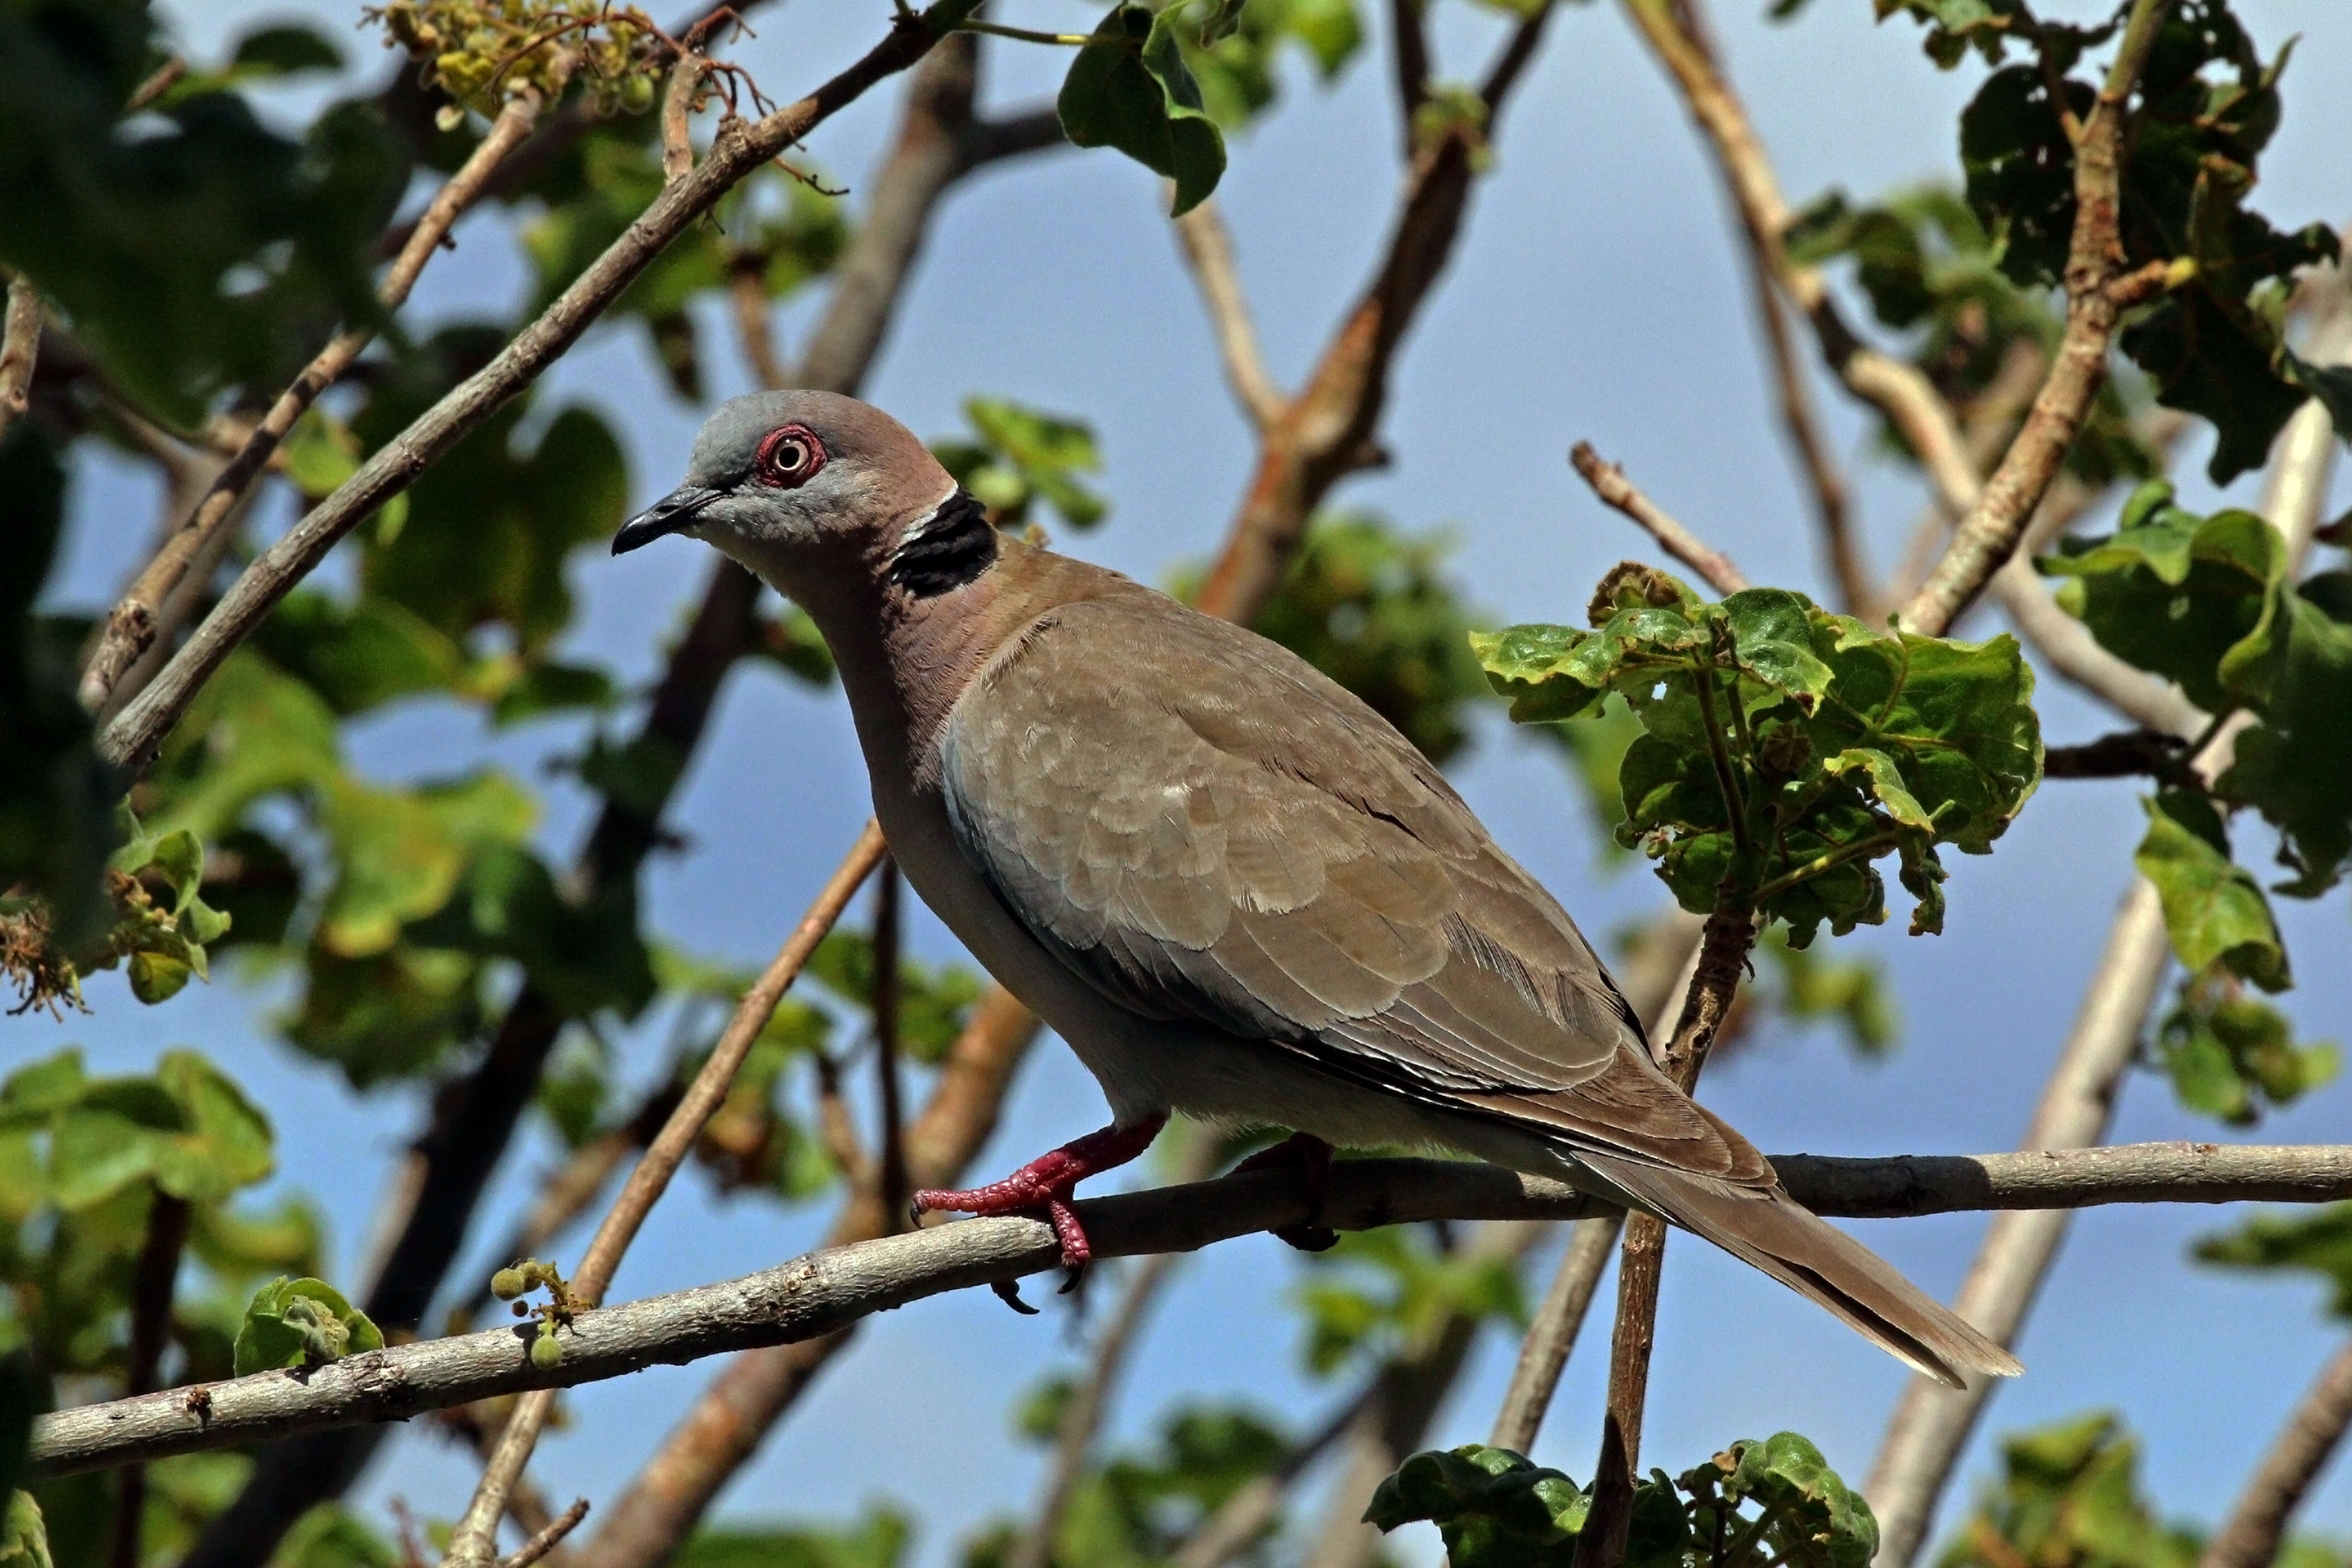 Image of African Mourning Dove